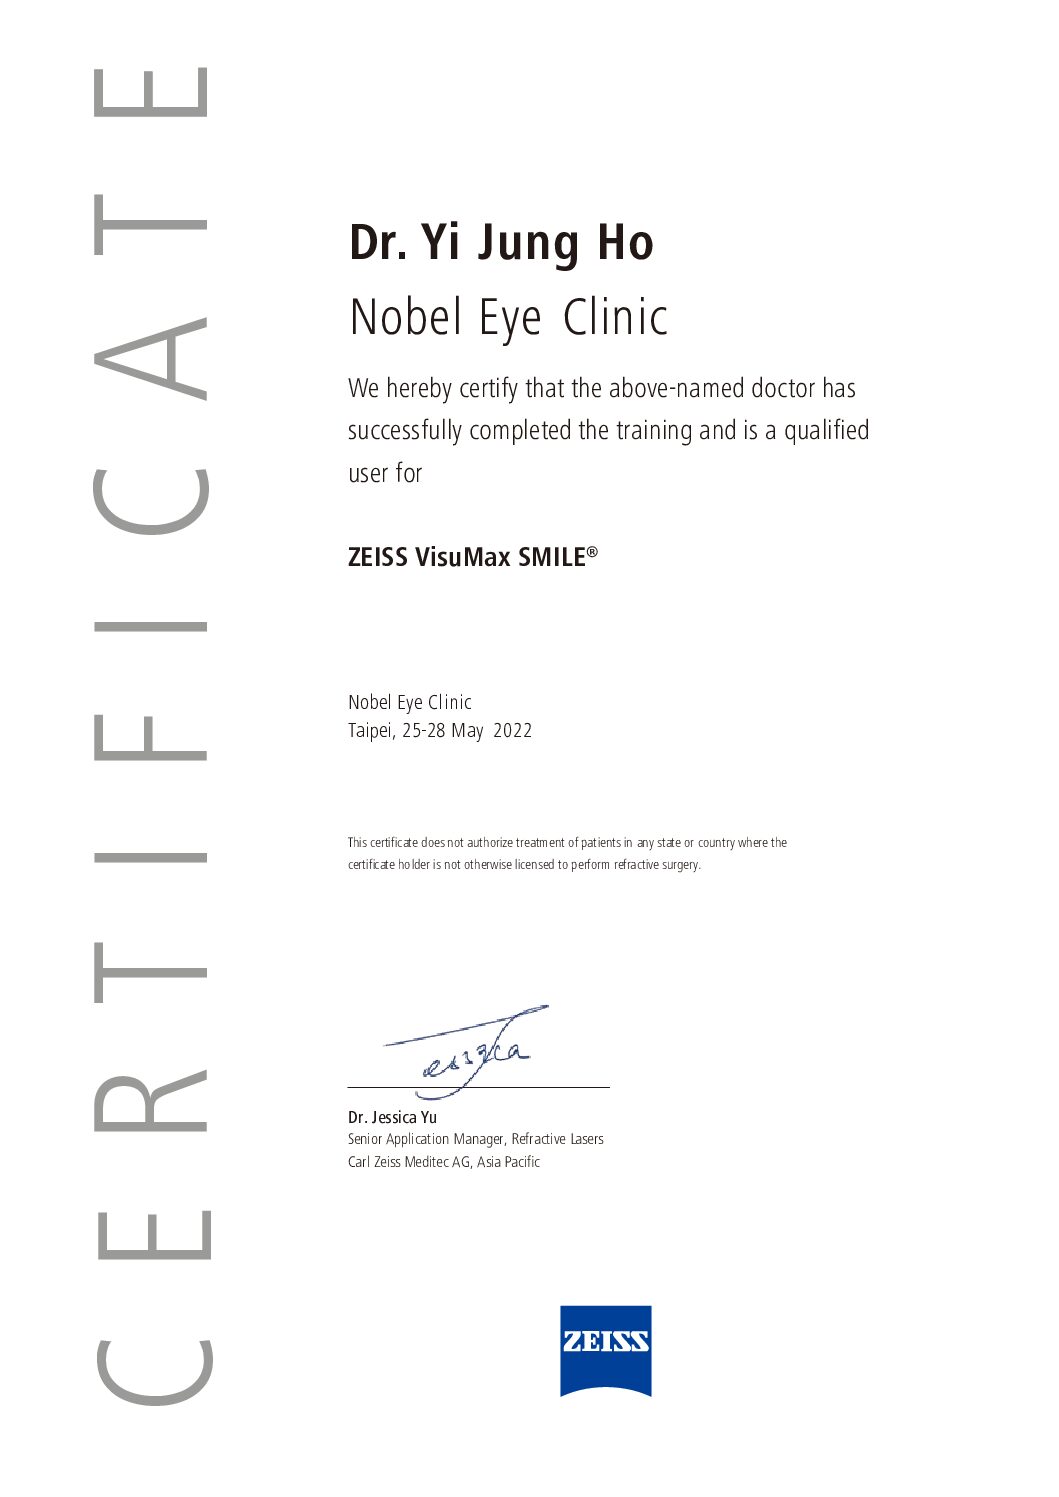 Smile certificates for Dr Yi Jung Ho